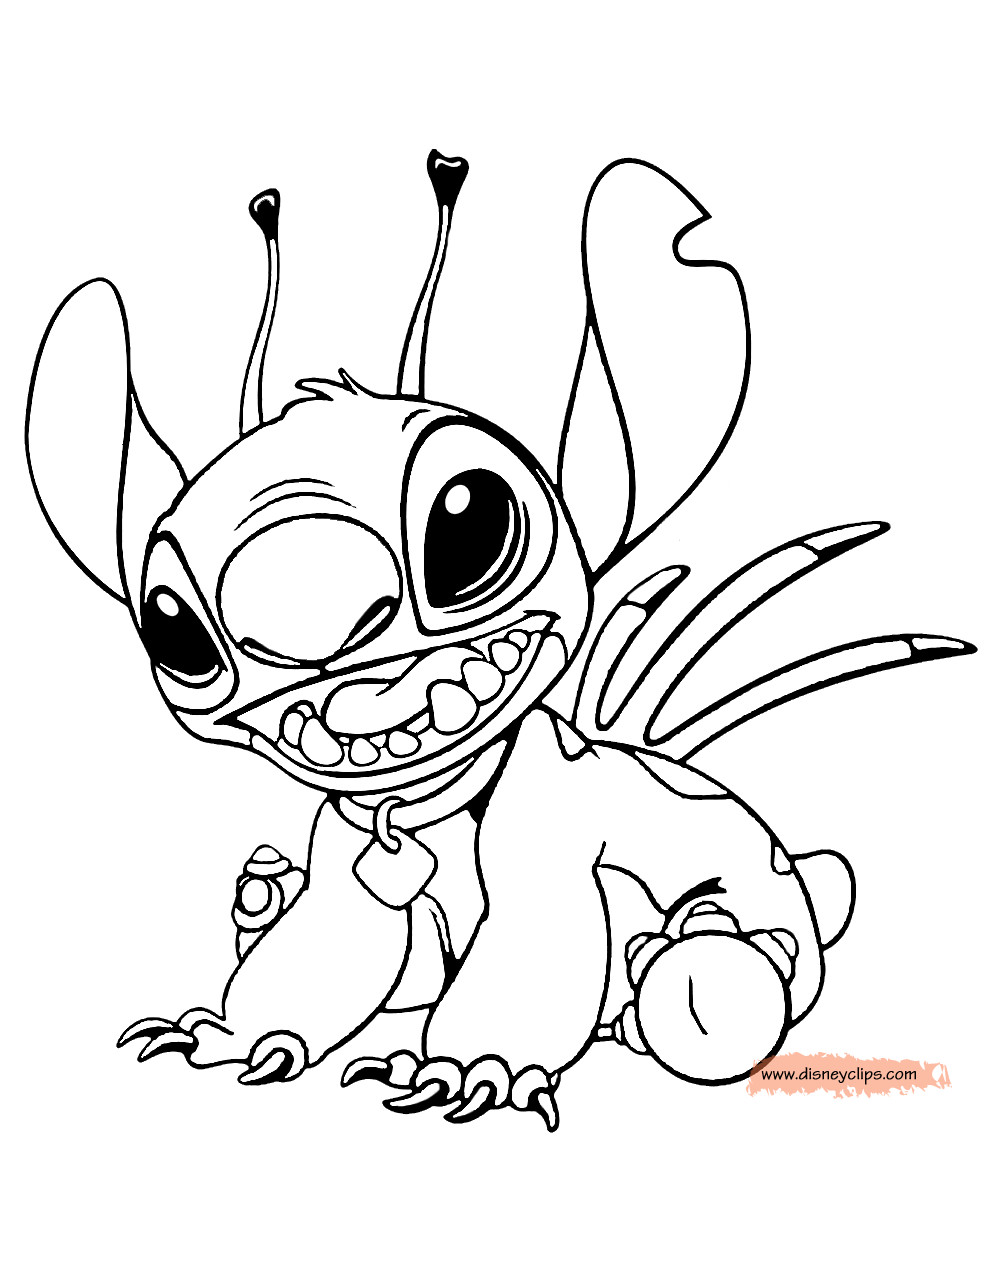 Stitch Coloring Pages To Print
 Lilo and Stitch Coloring Pages